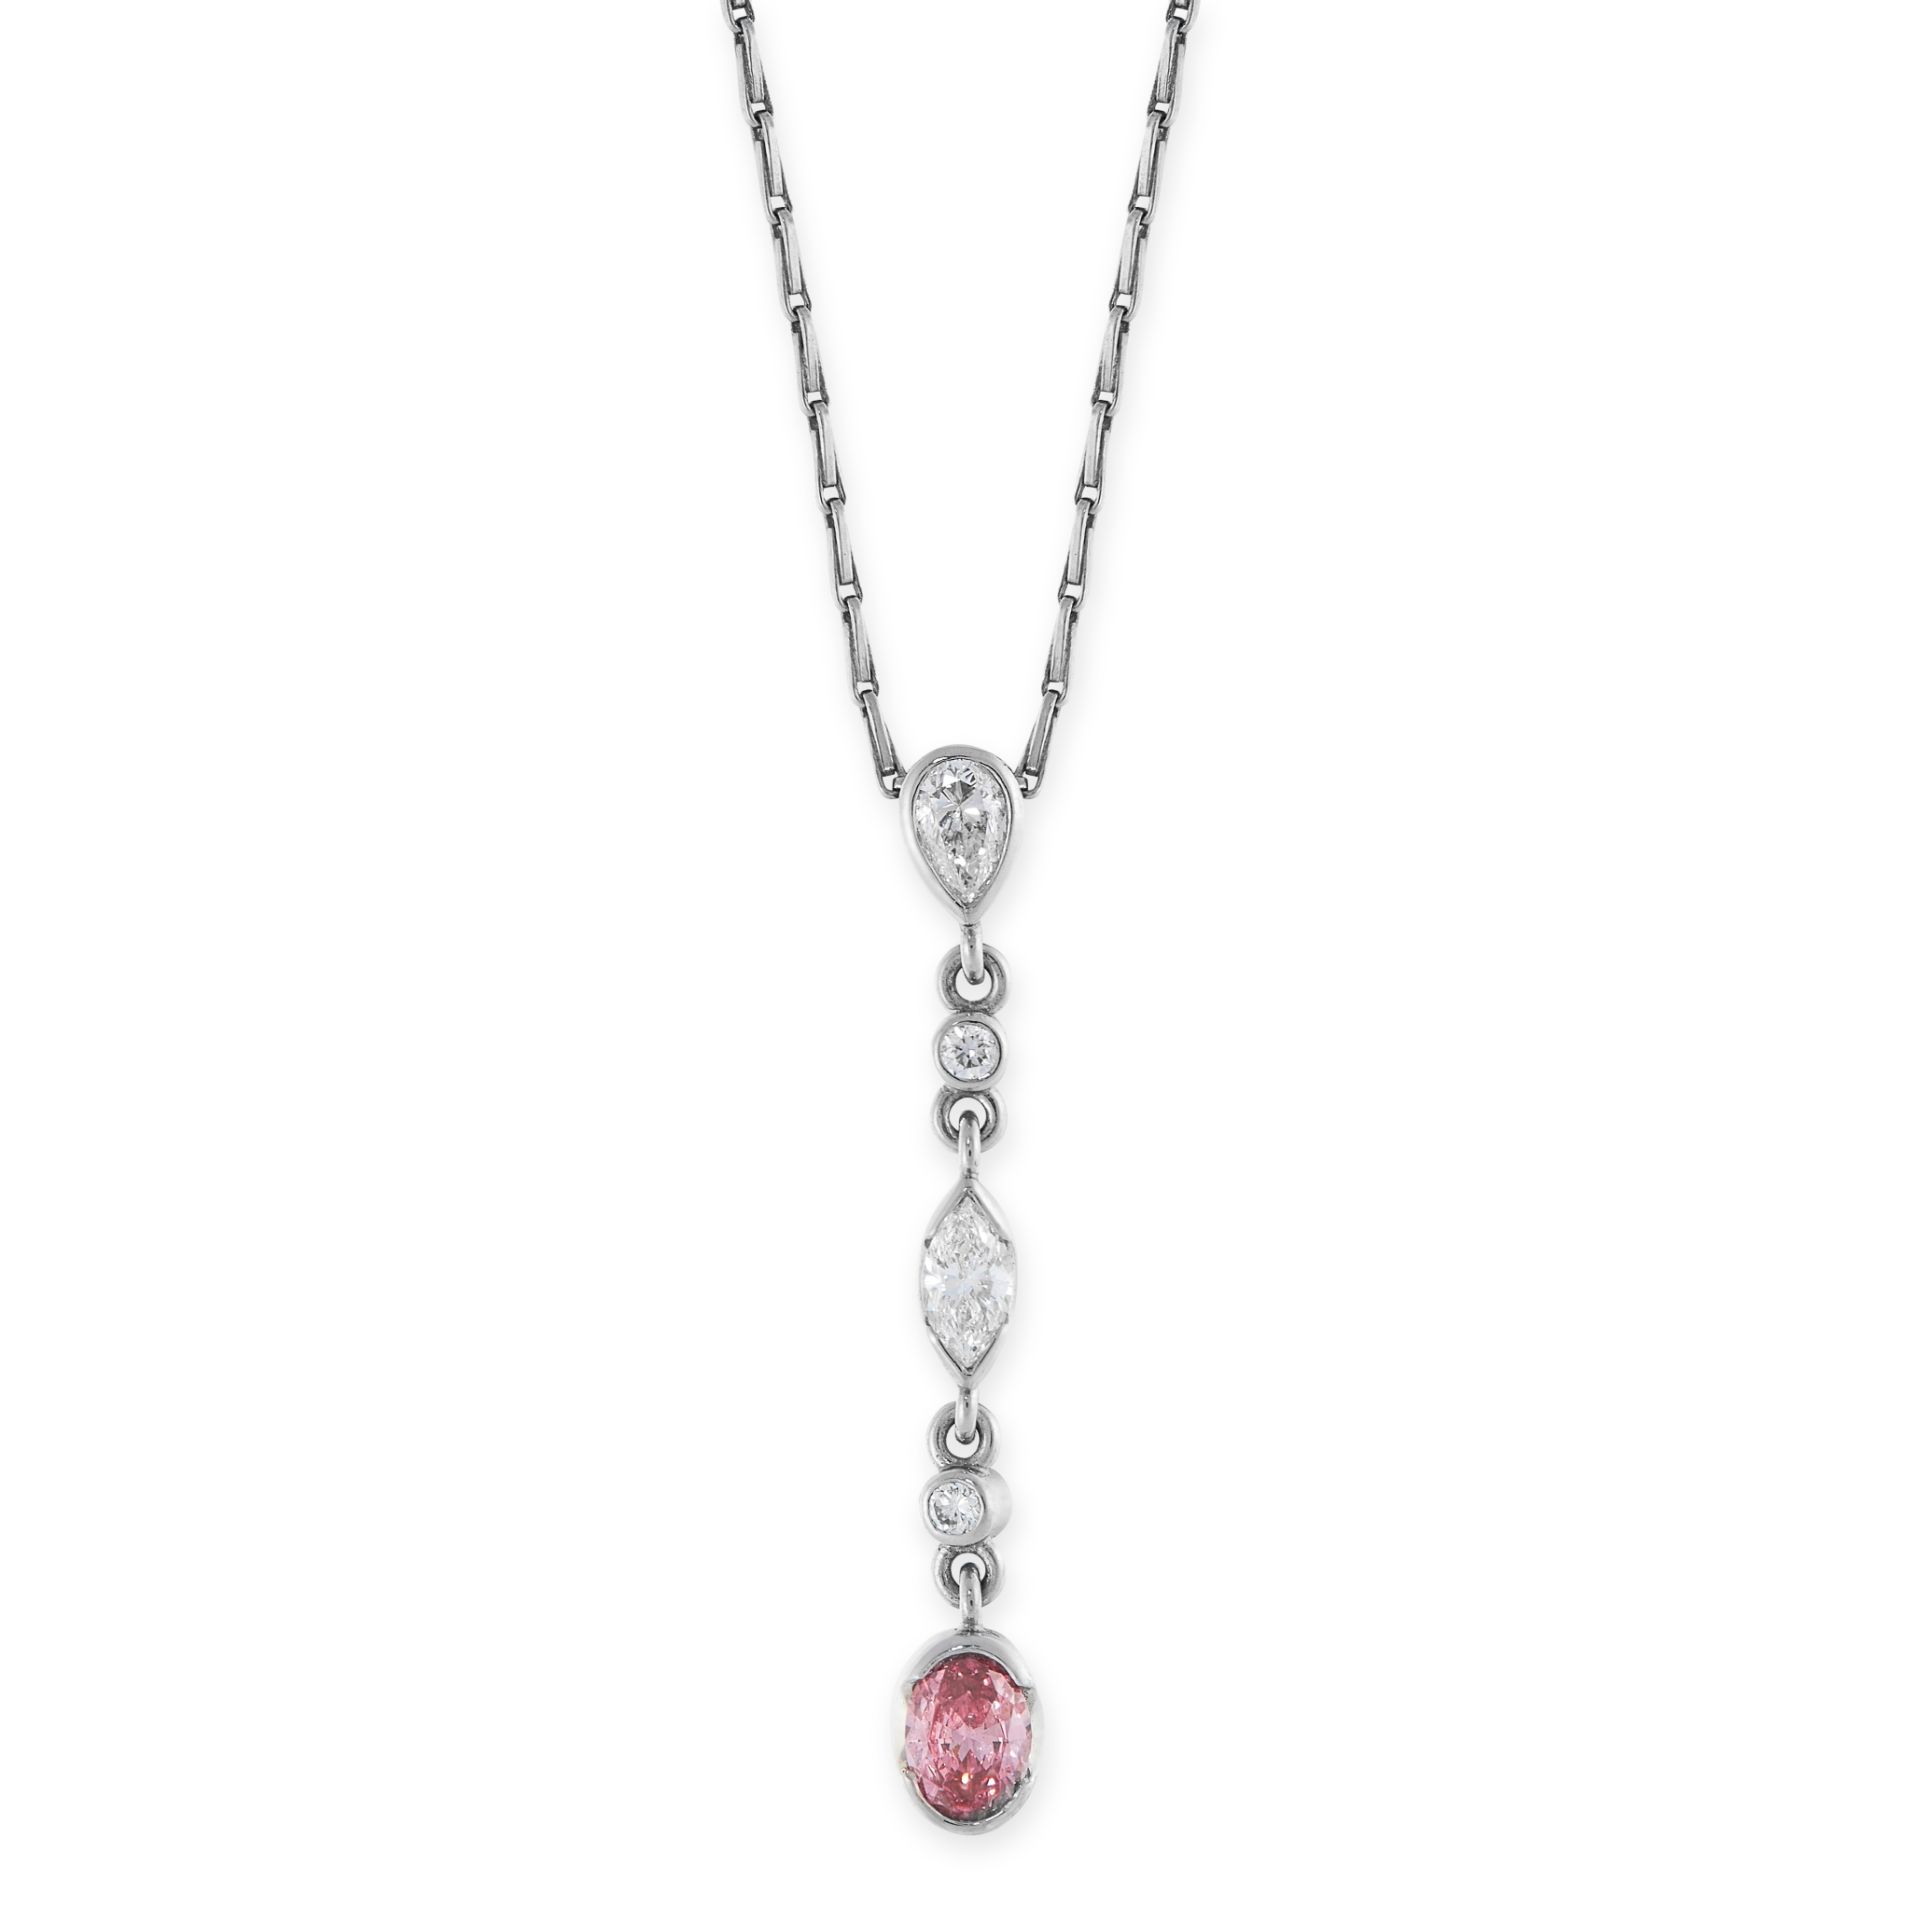 A FANCY VIVID PINK DIAMOND PENDANT NECKLACE in platinum, set with an oval cut fancy vivid pink